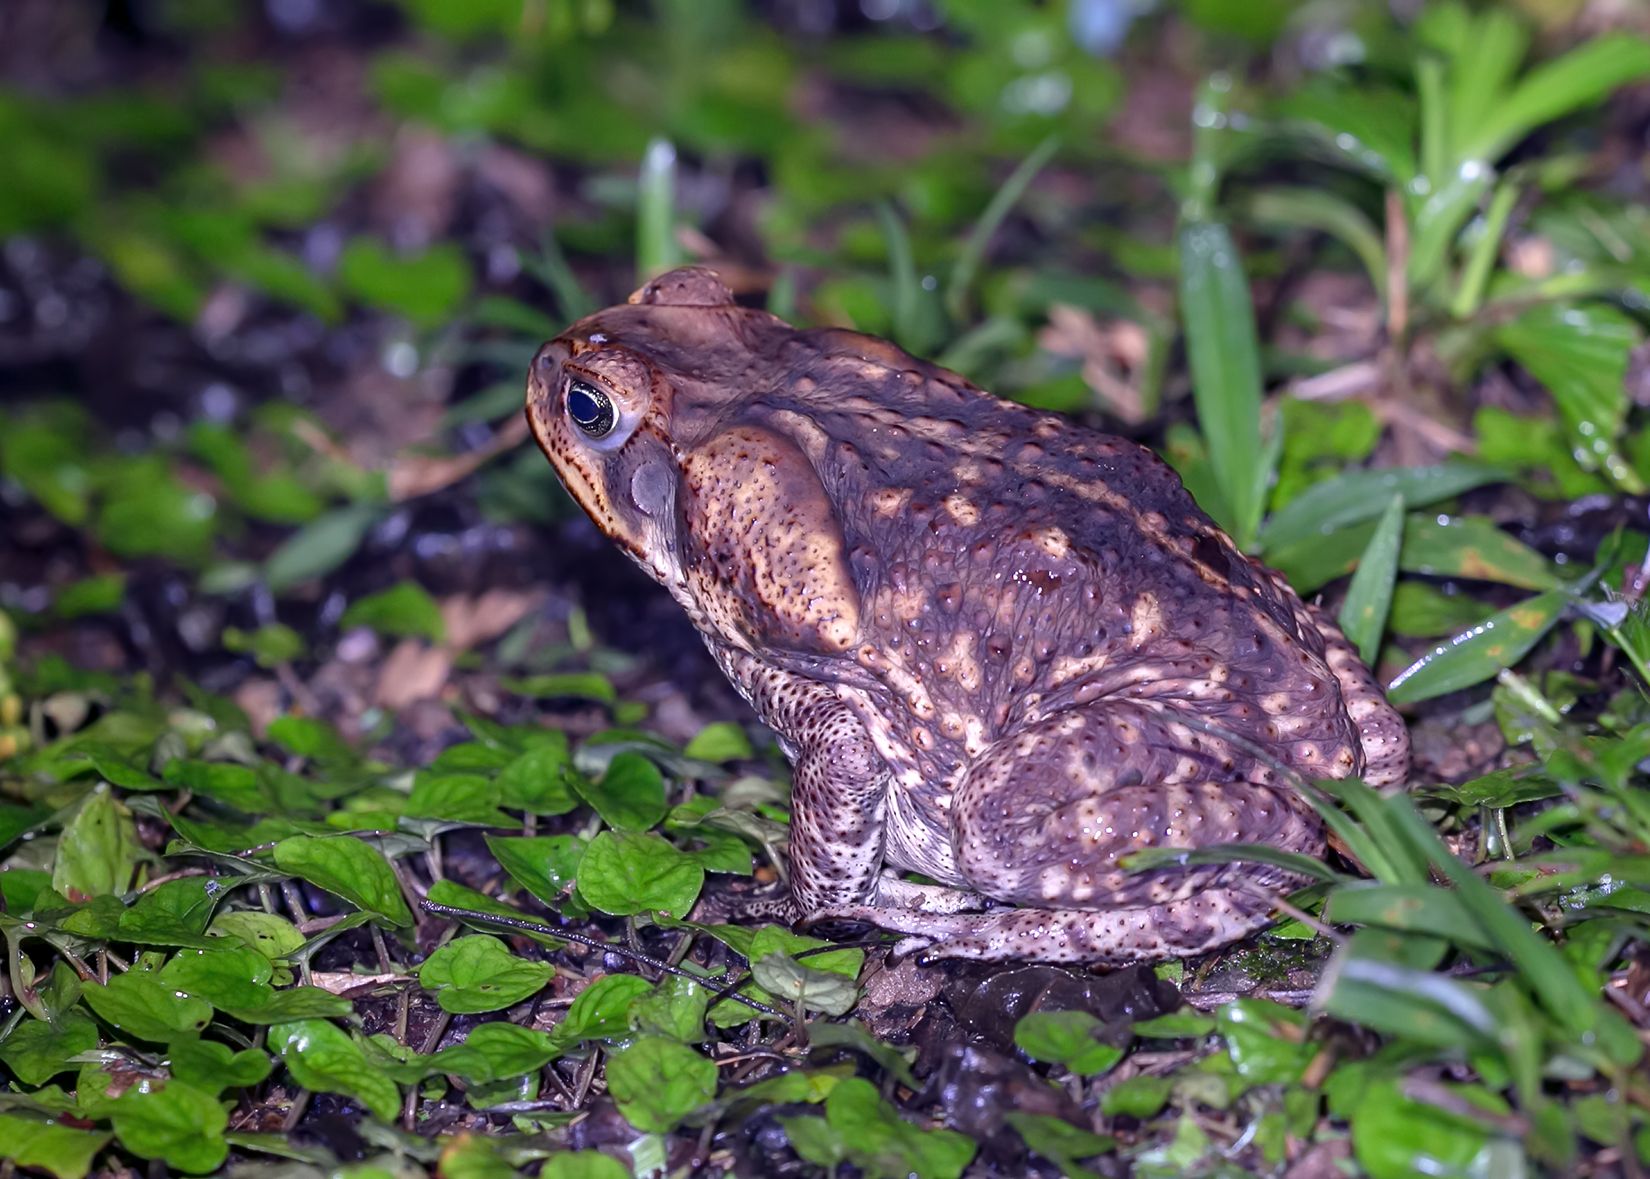 Cane Toad by Charlie Jackson, Flickr